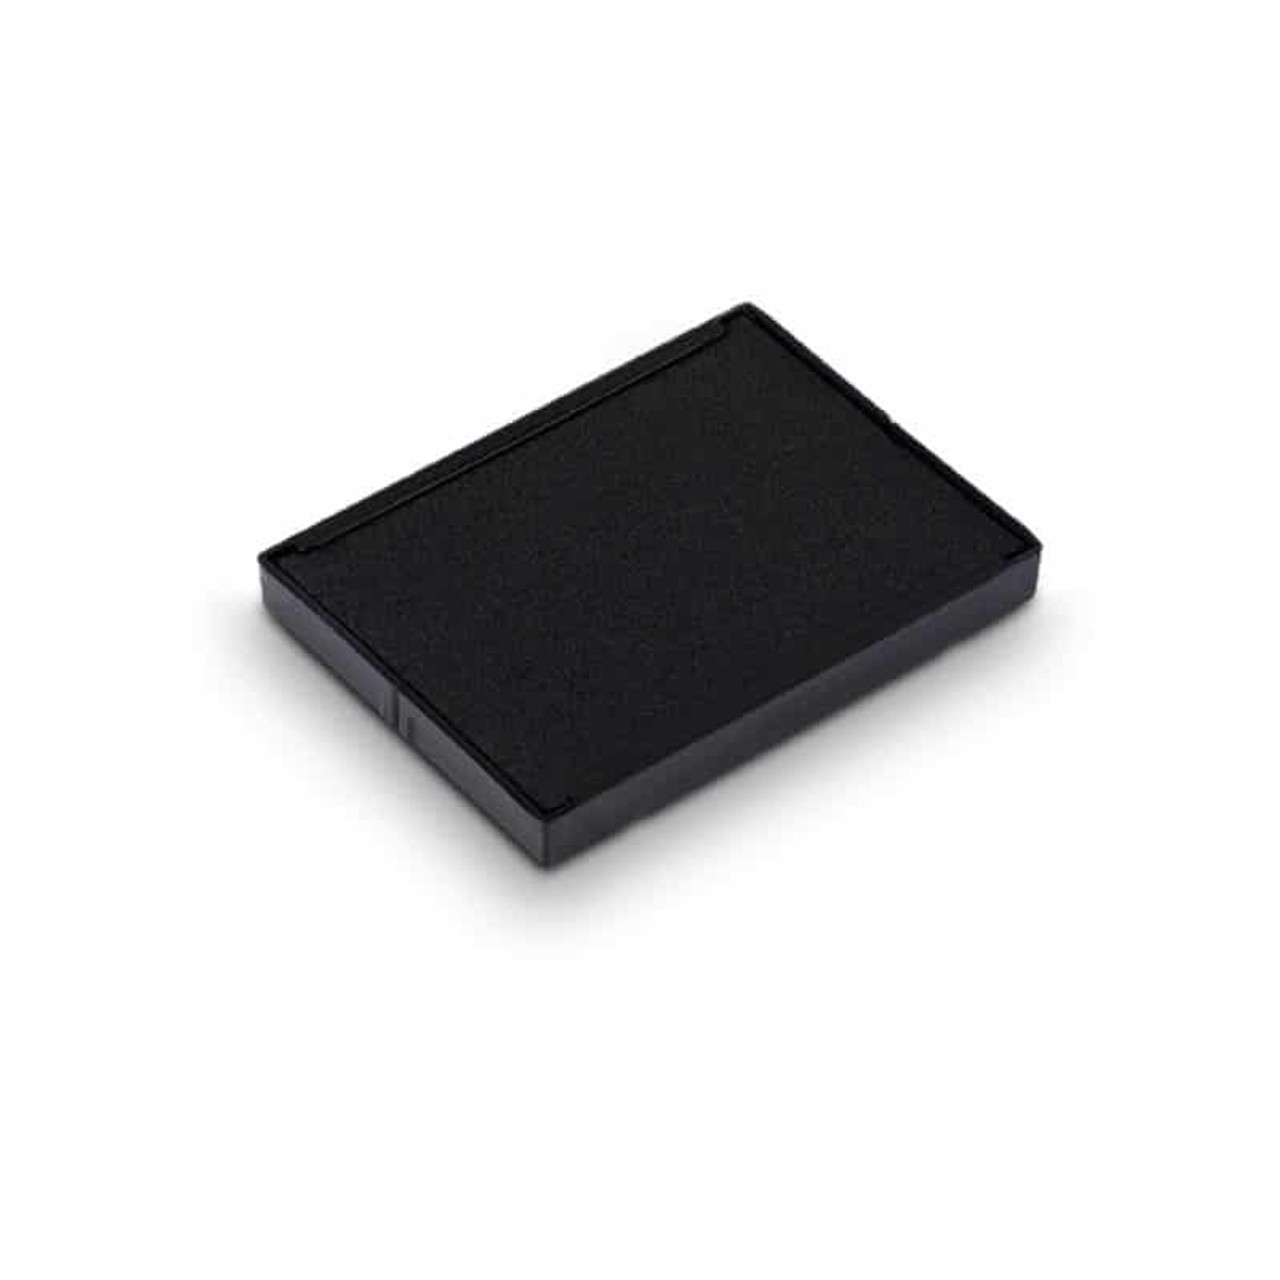 Trodat Printy 46130 Replacement Ink Pad